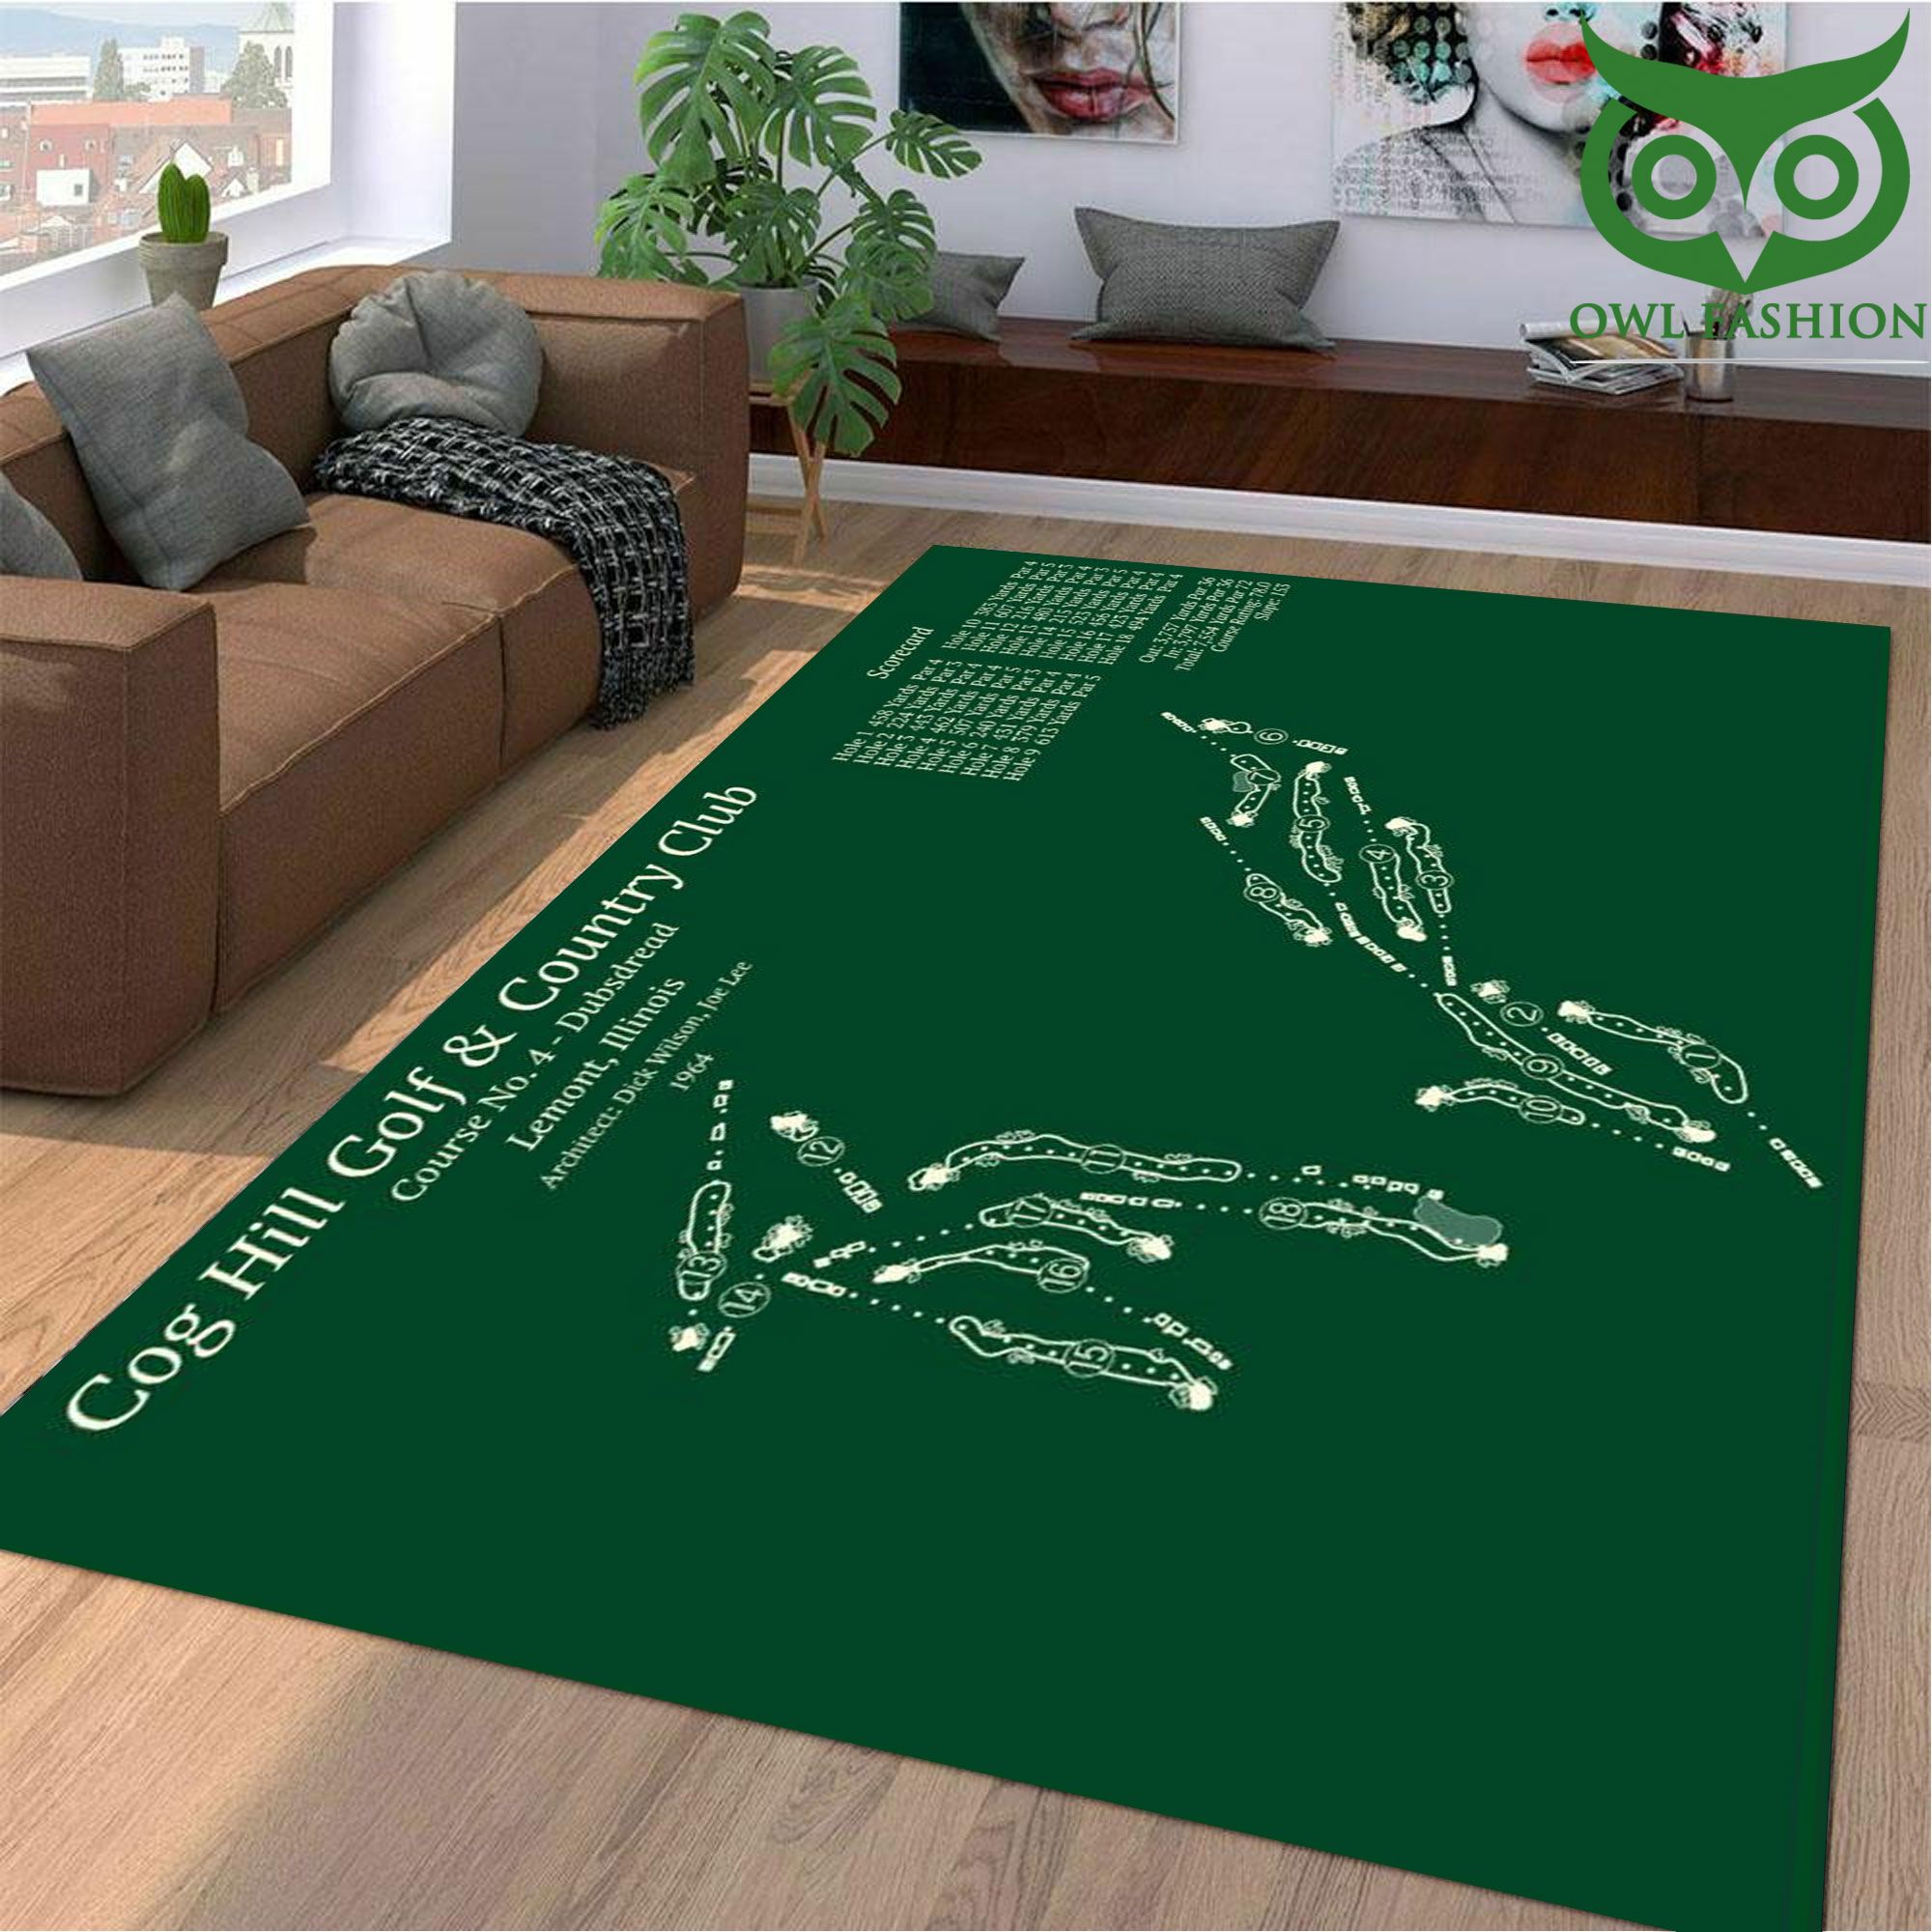 Cog hill golf and country club golf course map 3D Carpet Rug